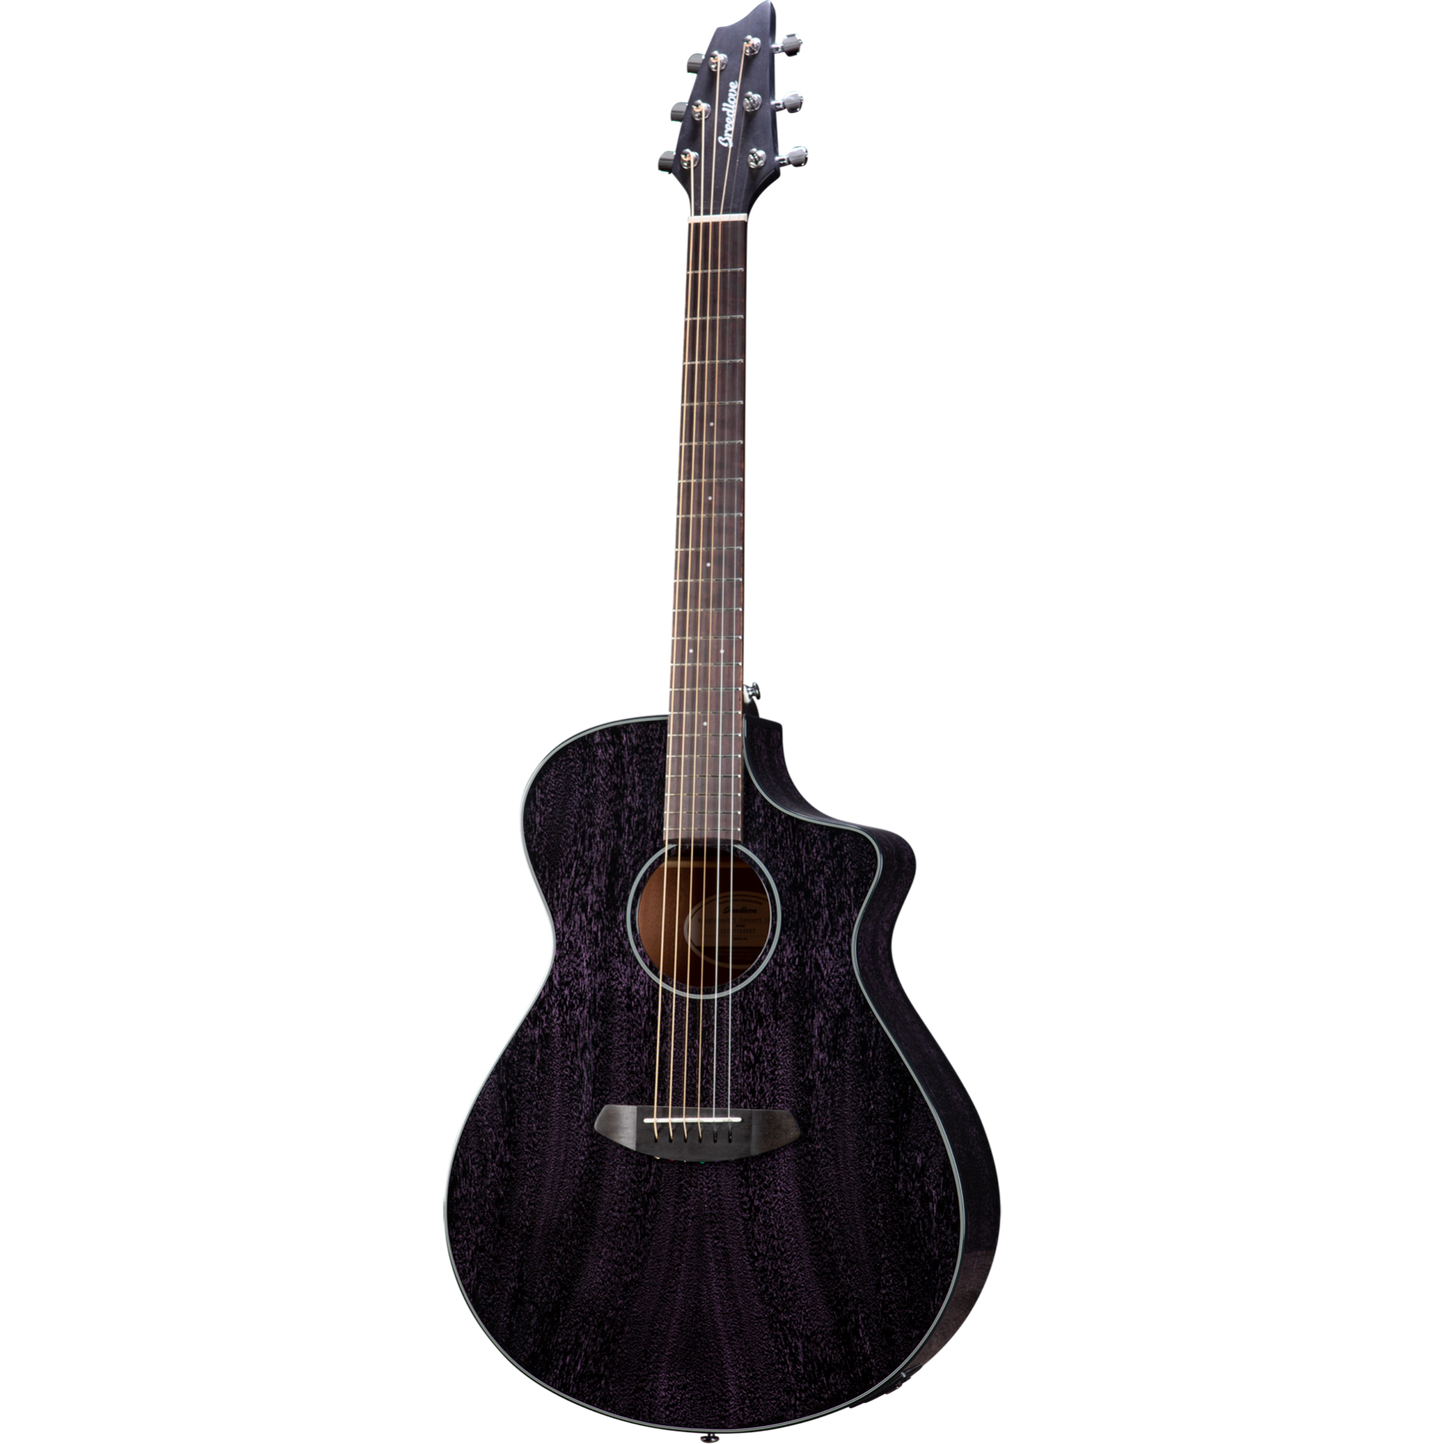 Breedlove Rainforest S Concert Orchid CE Acoustic Guitar in African Mahogany